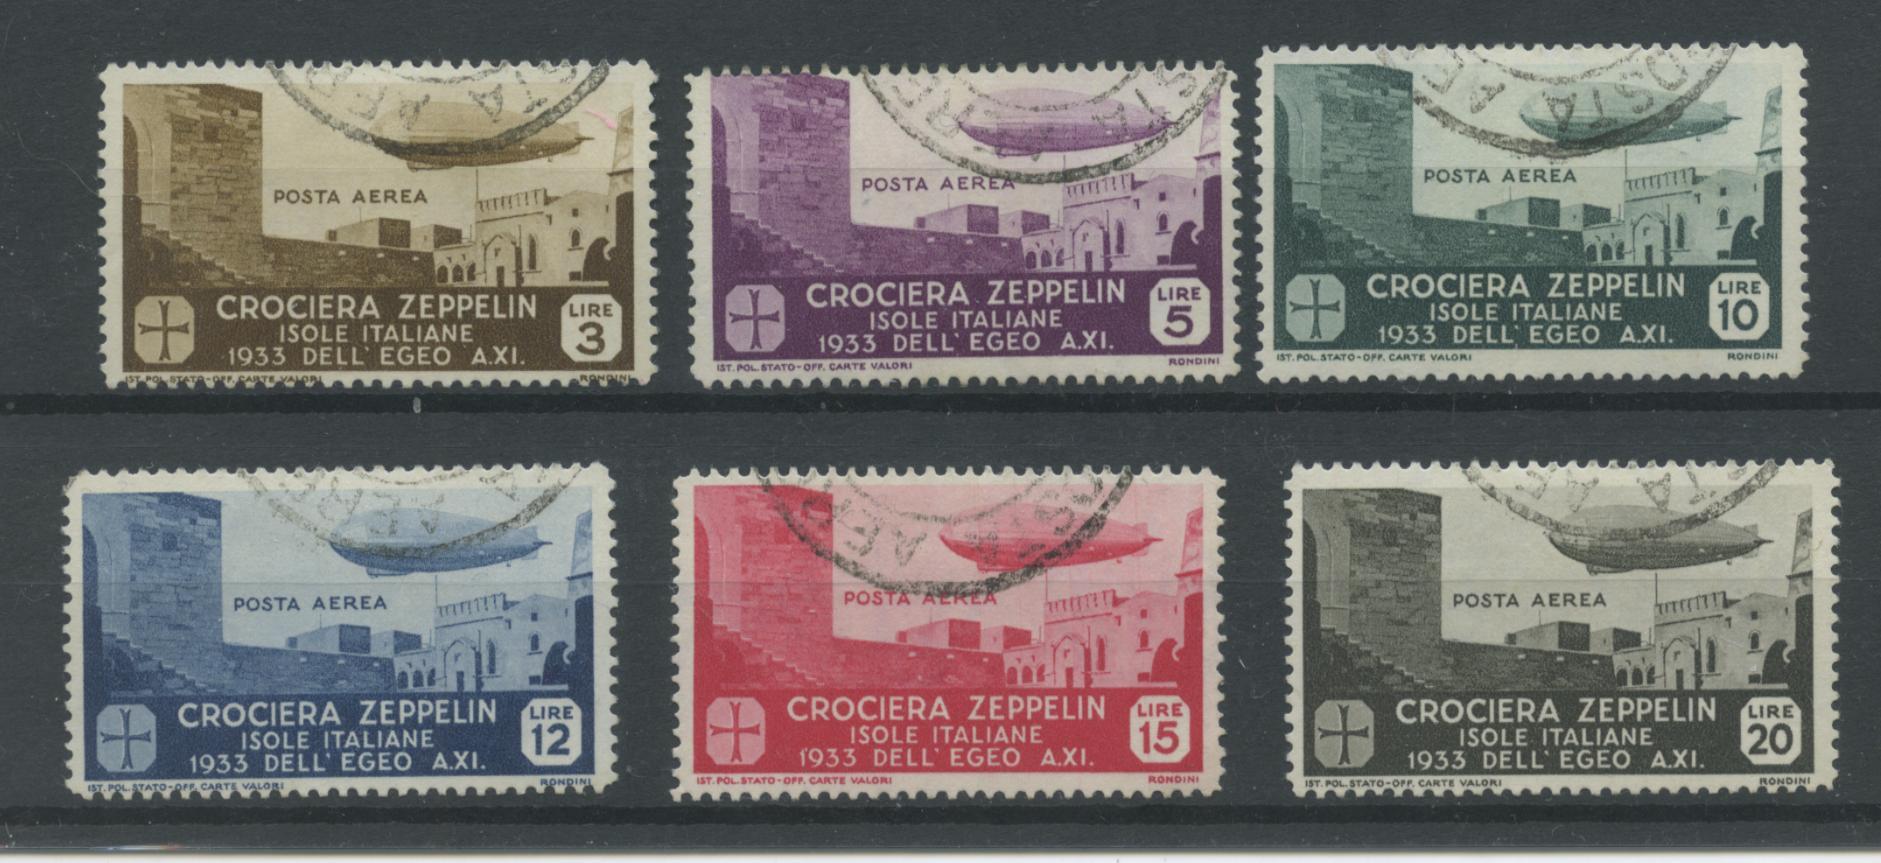 Scansione lotto: COLONIE EGEO 1933 ZEPPELIN 6V. US.